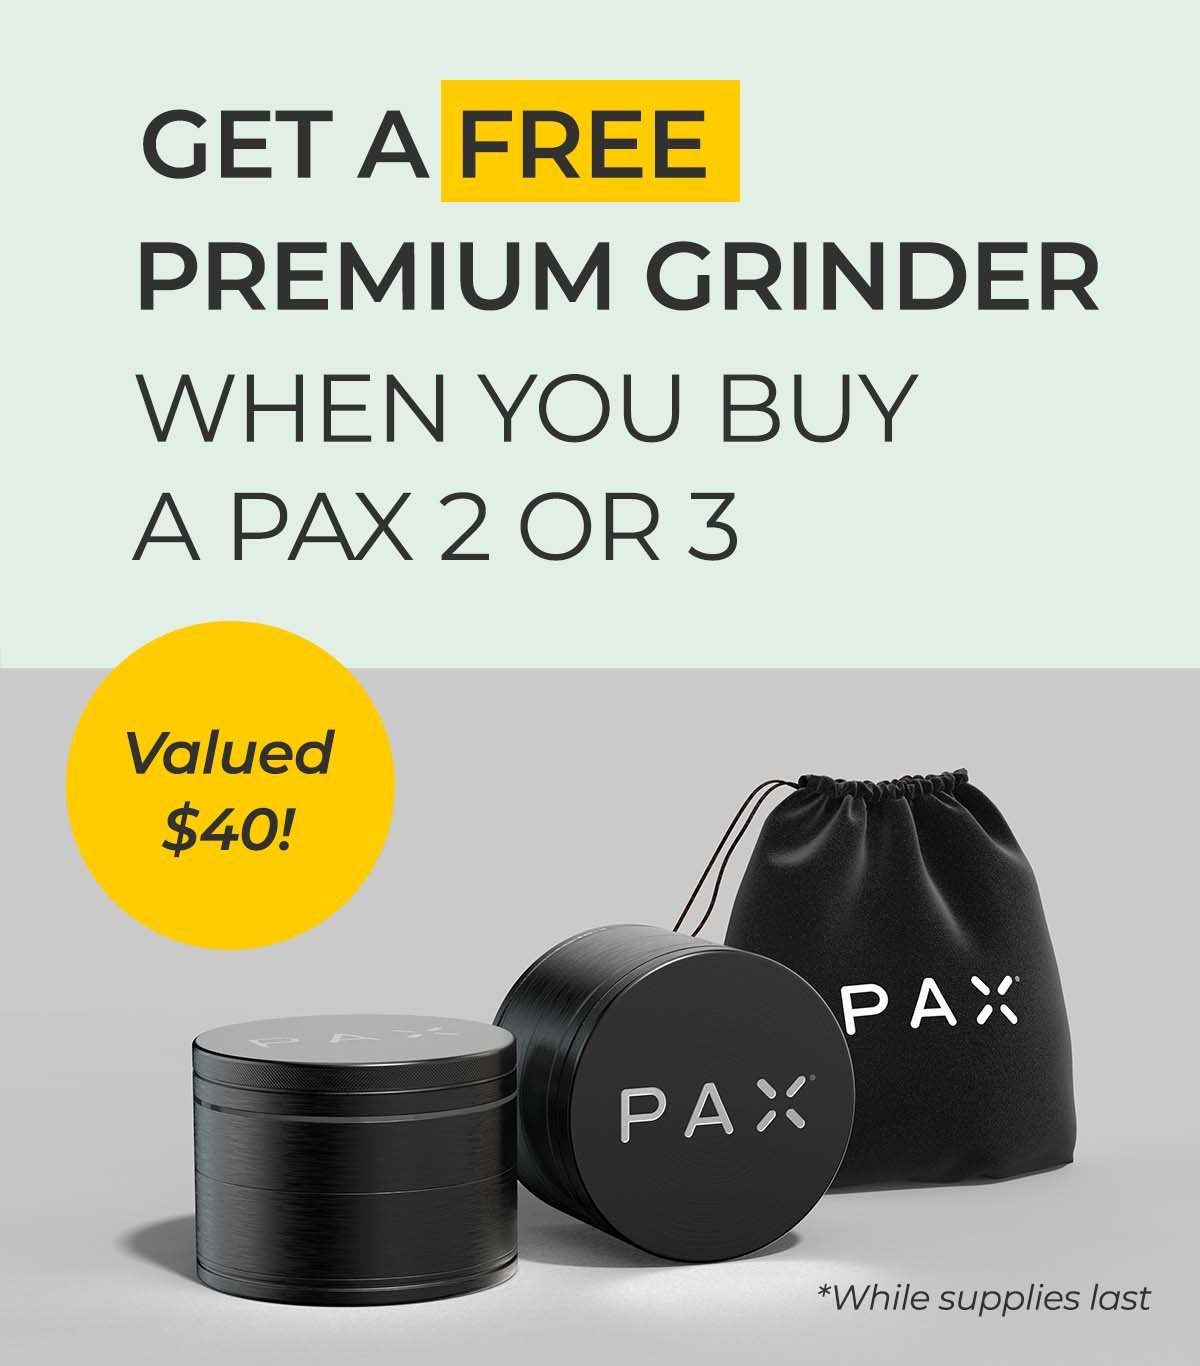 Planet of the Vapes: Free Grinder with any PAX 2 or 3